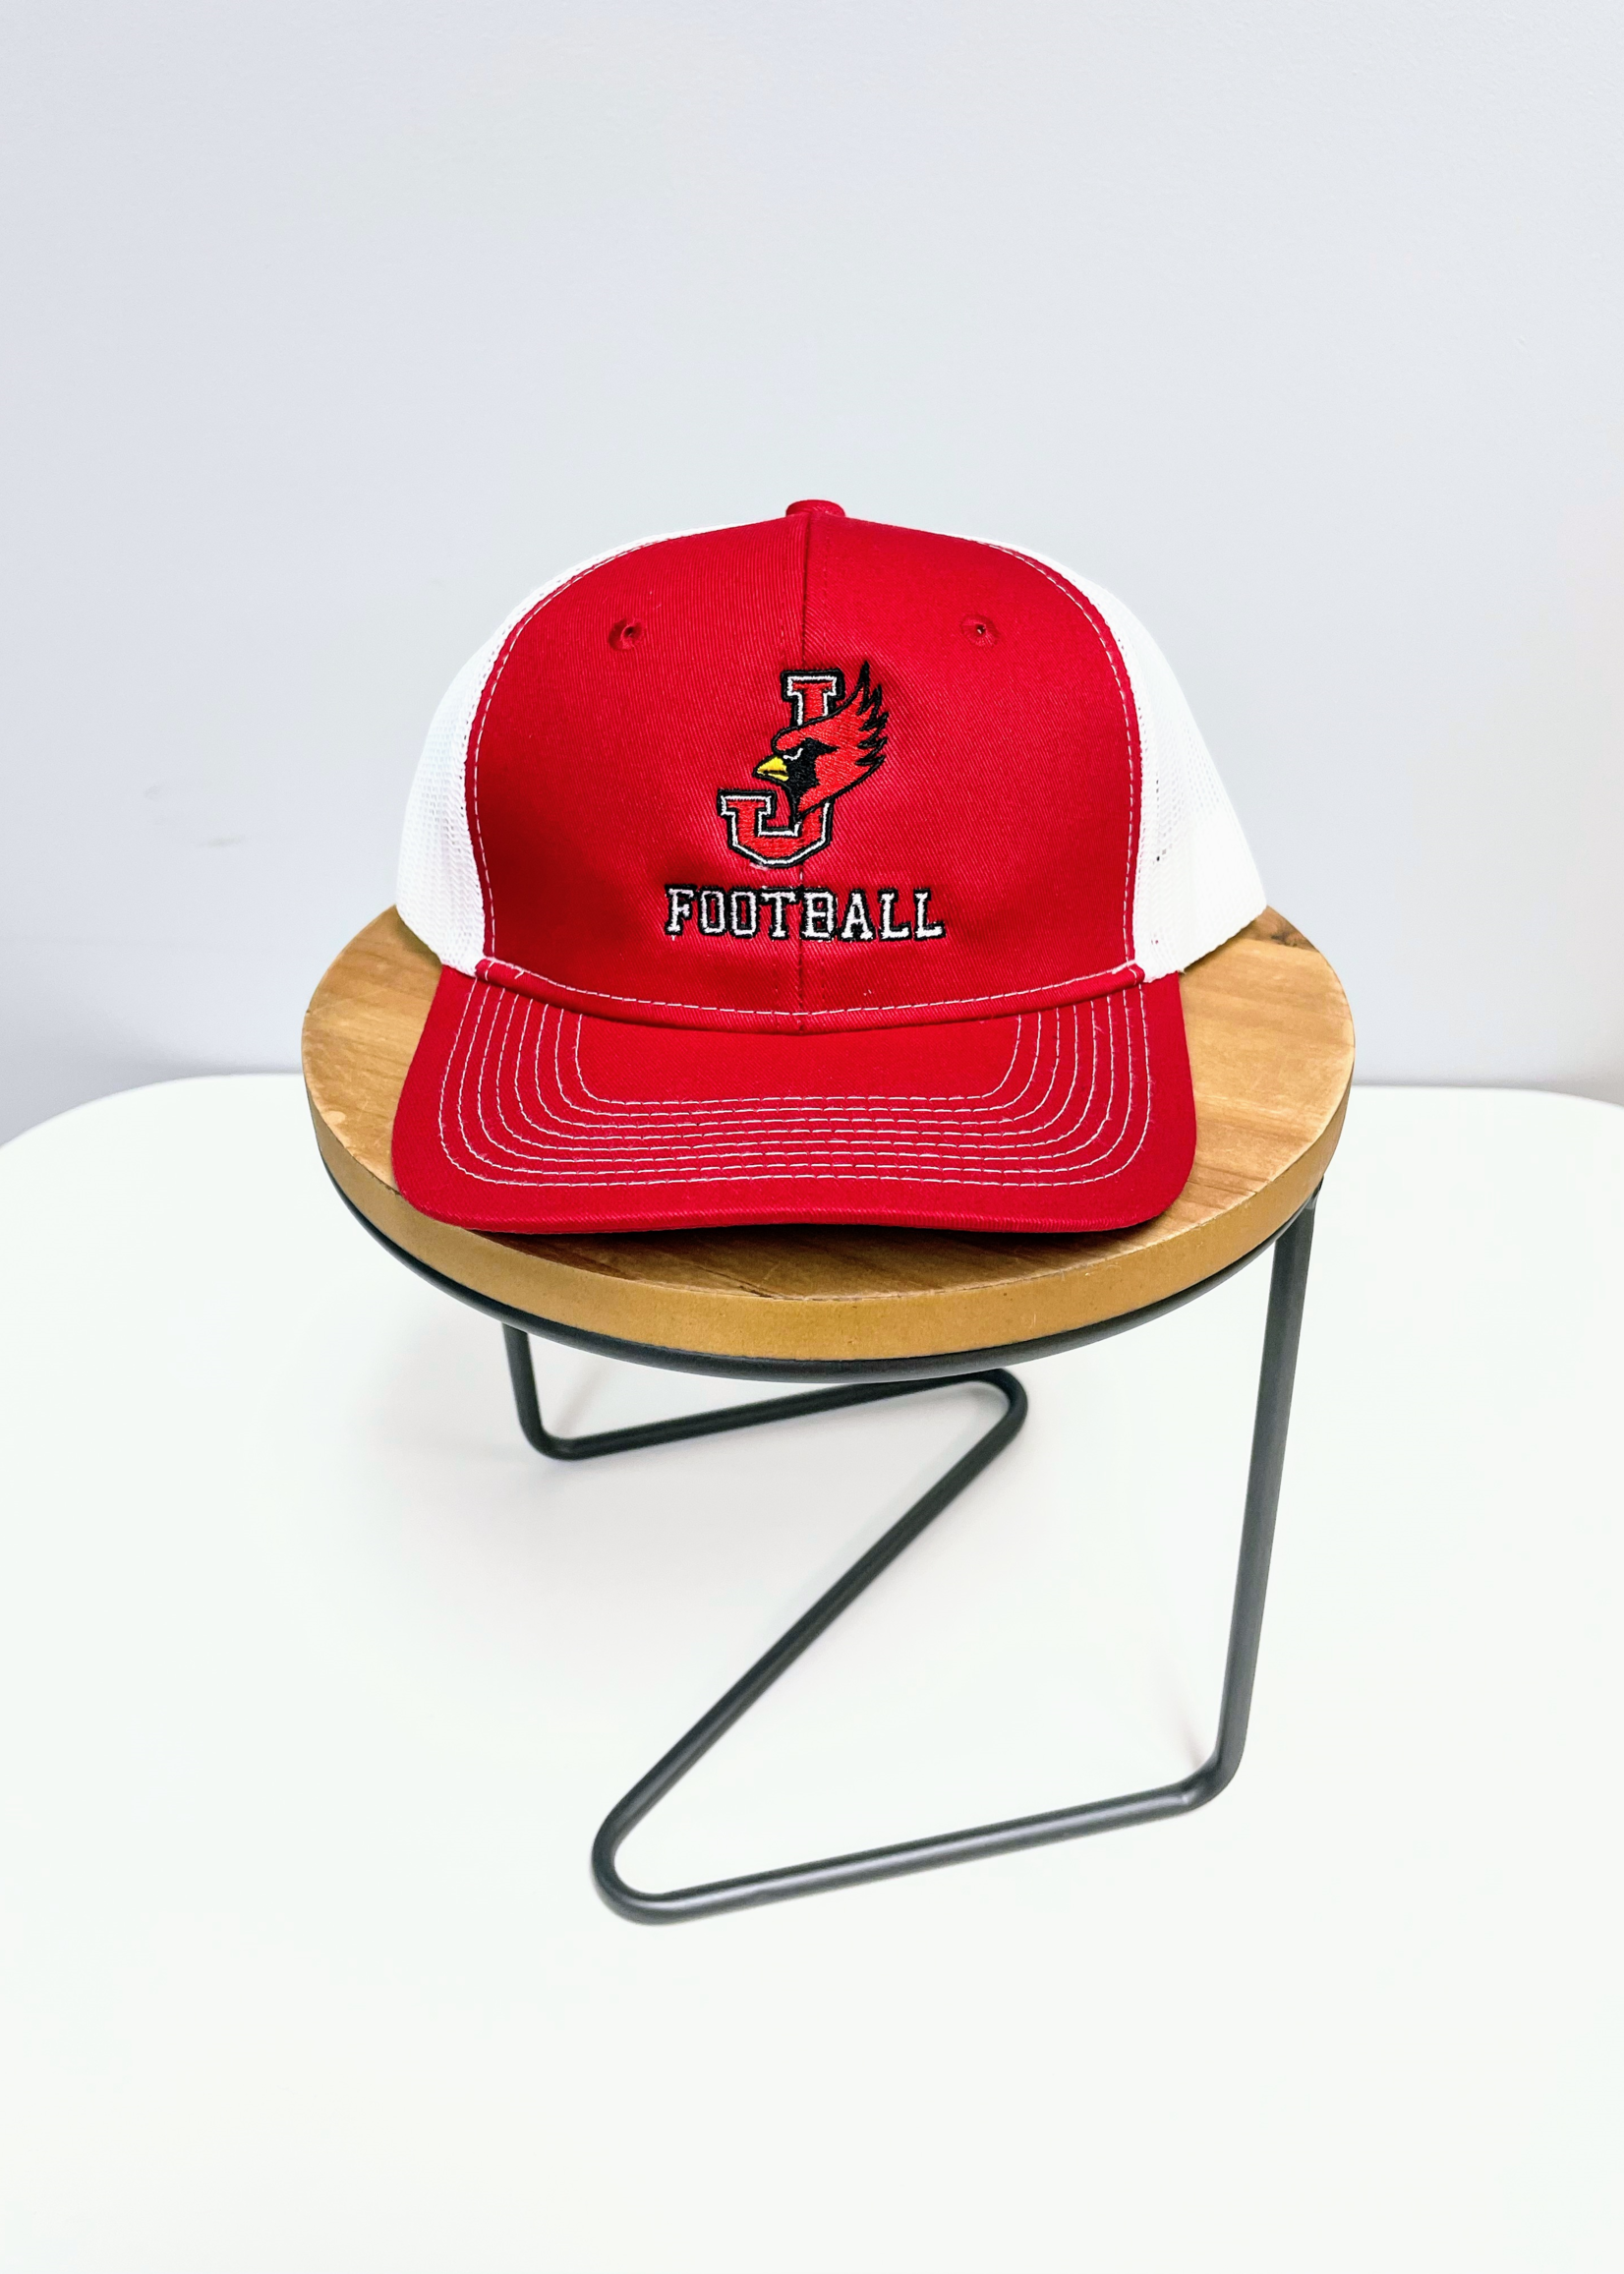 Football Jewell Trucker Hat Snap Back Red/White